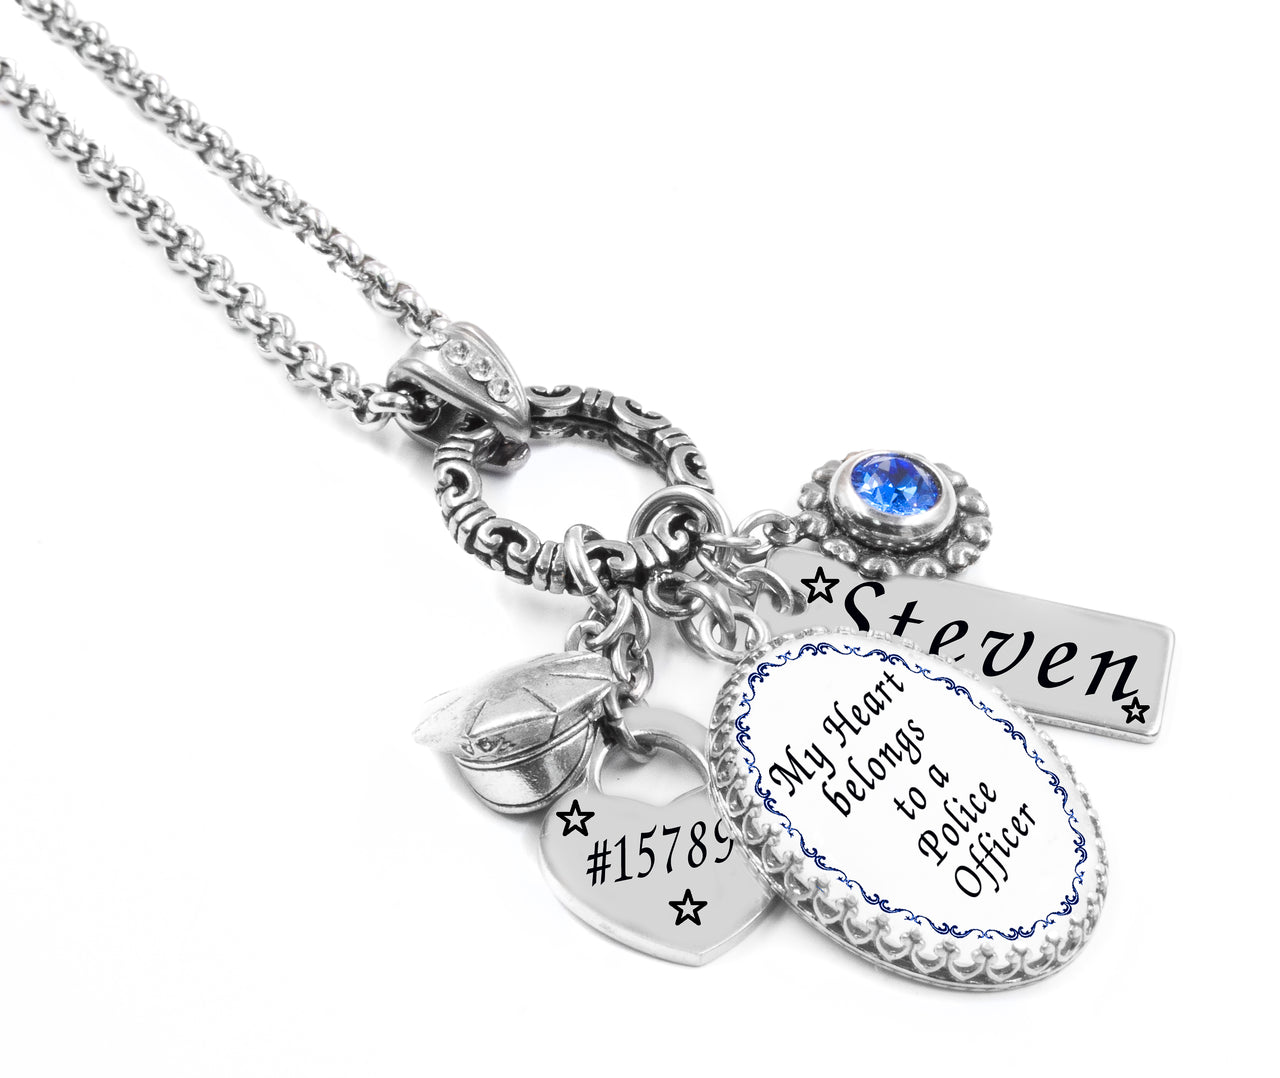 police officer necklace